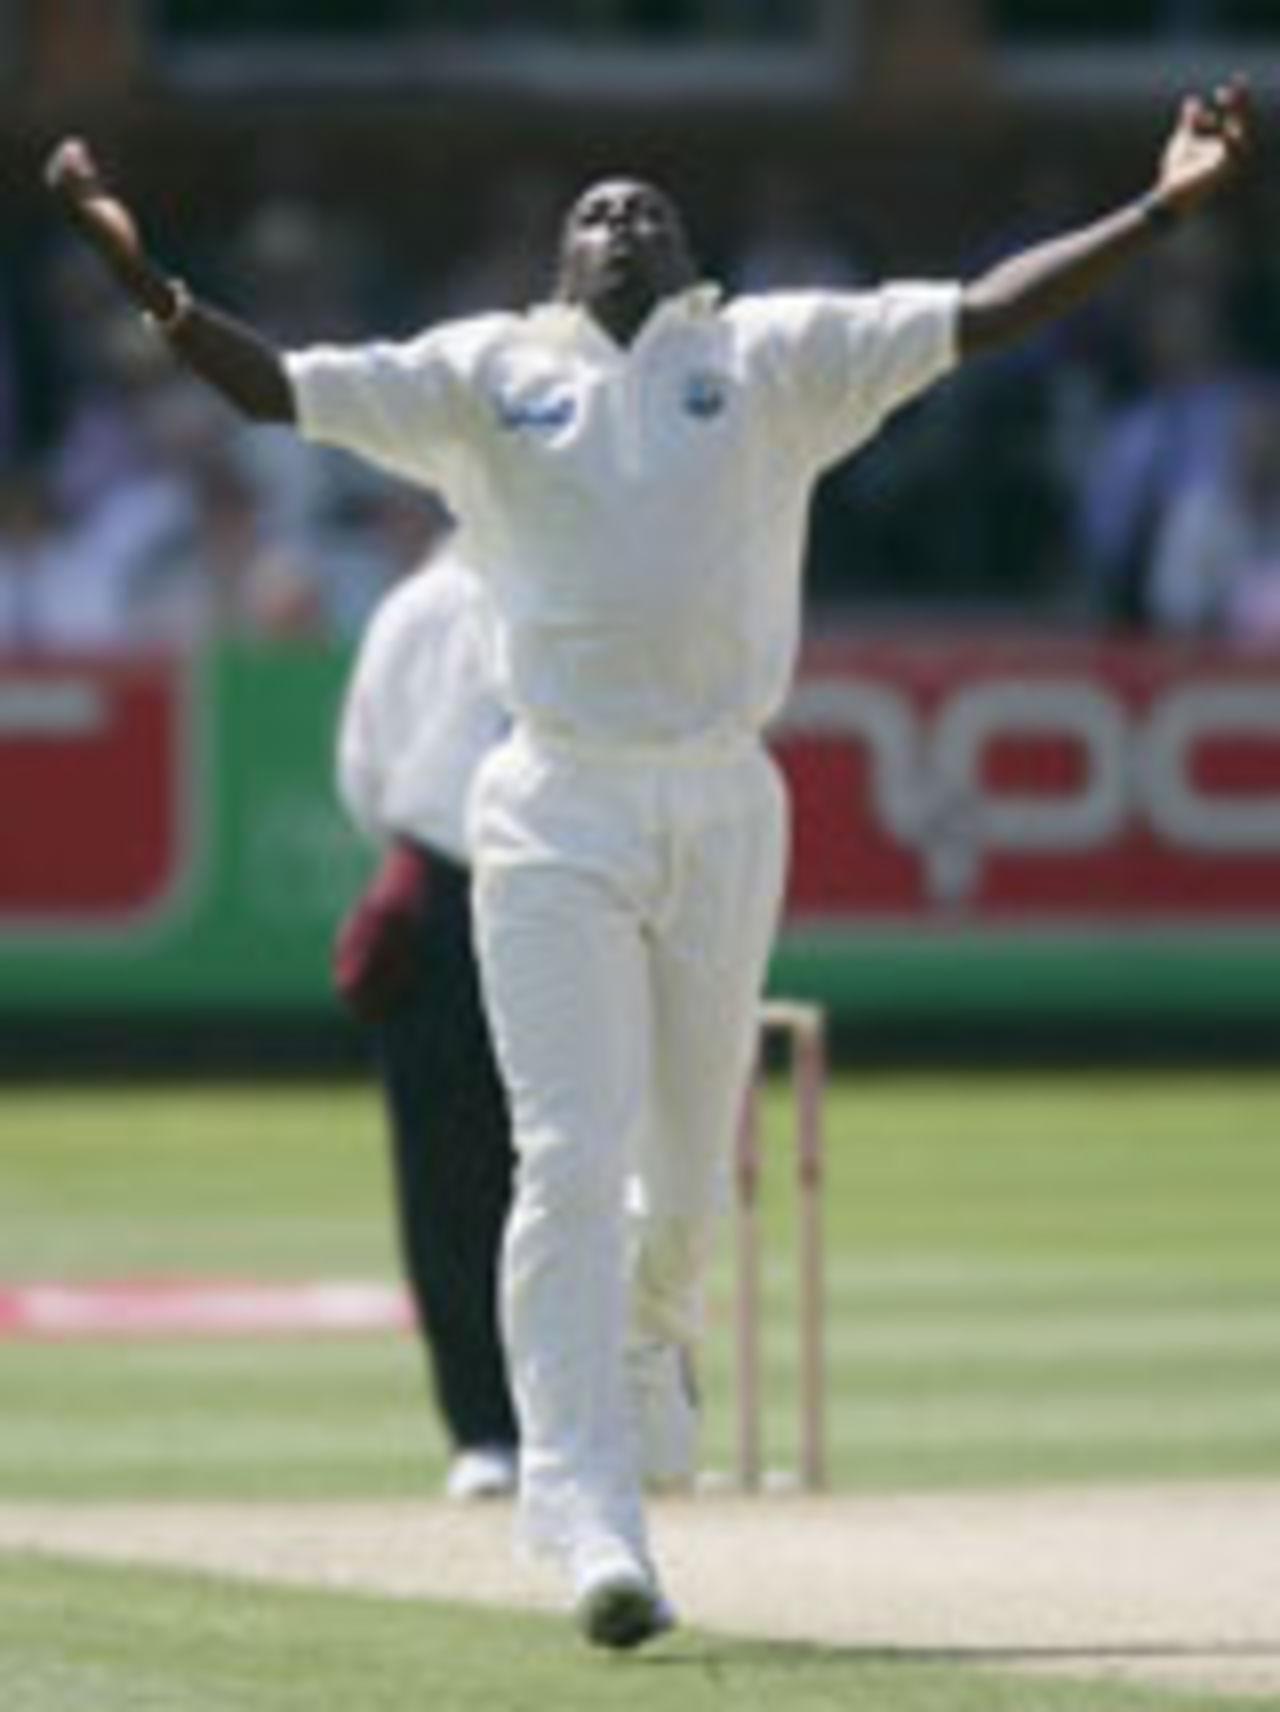 Pedro Collins celebrates a wicket, England v West Indies, 1st Test, Lord's, July 23, 2004